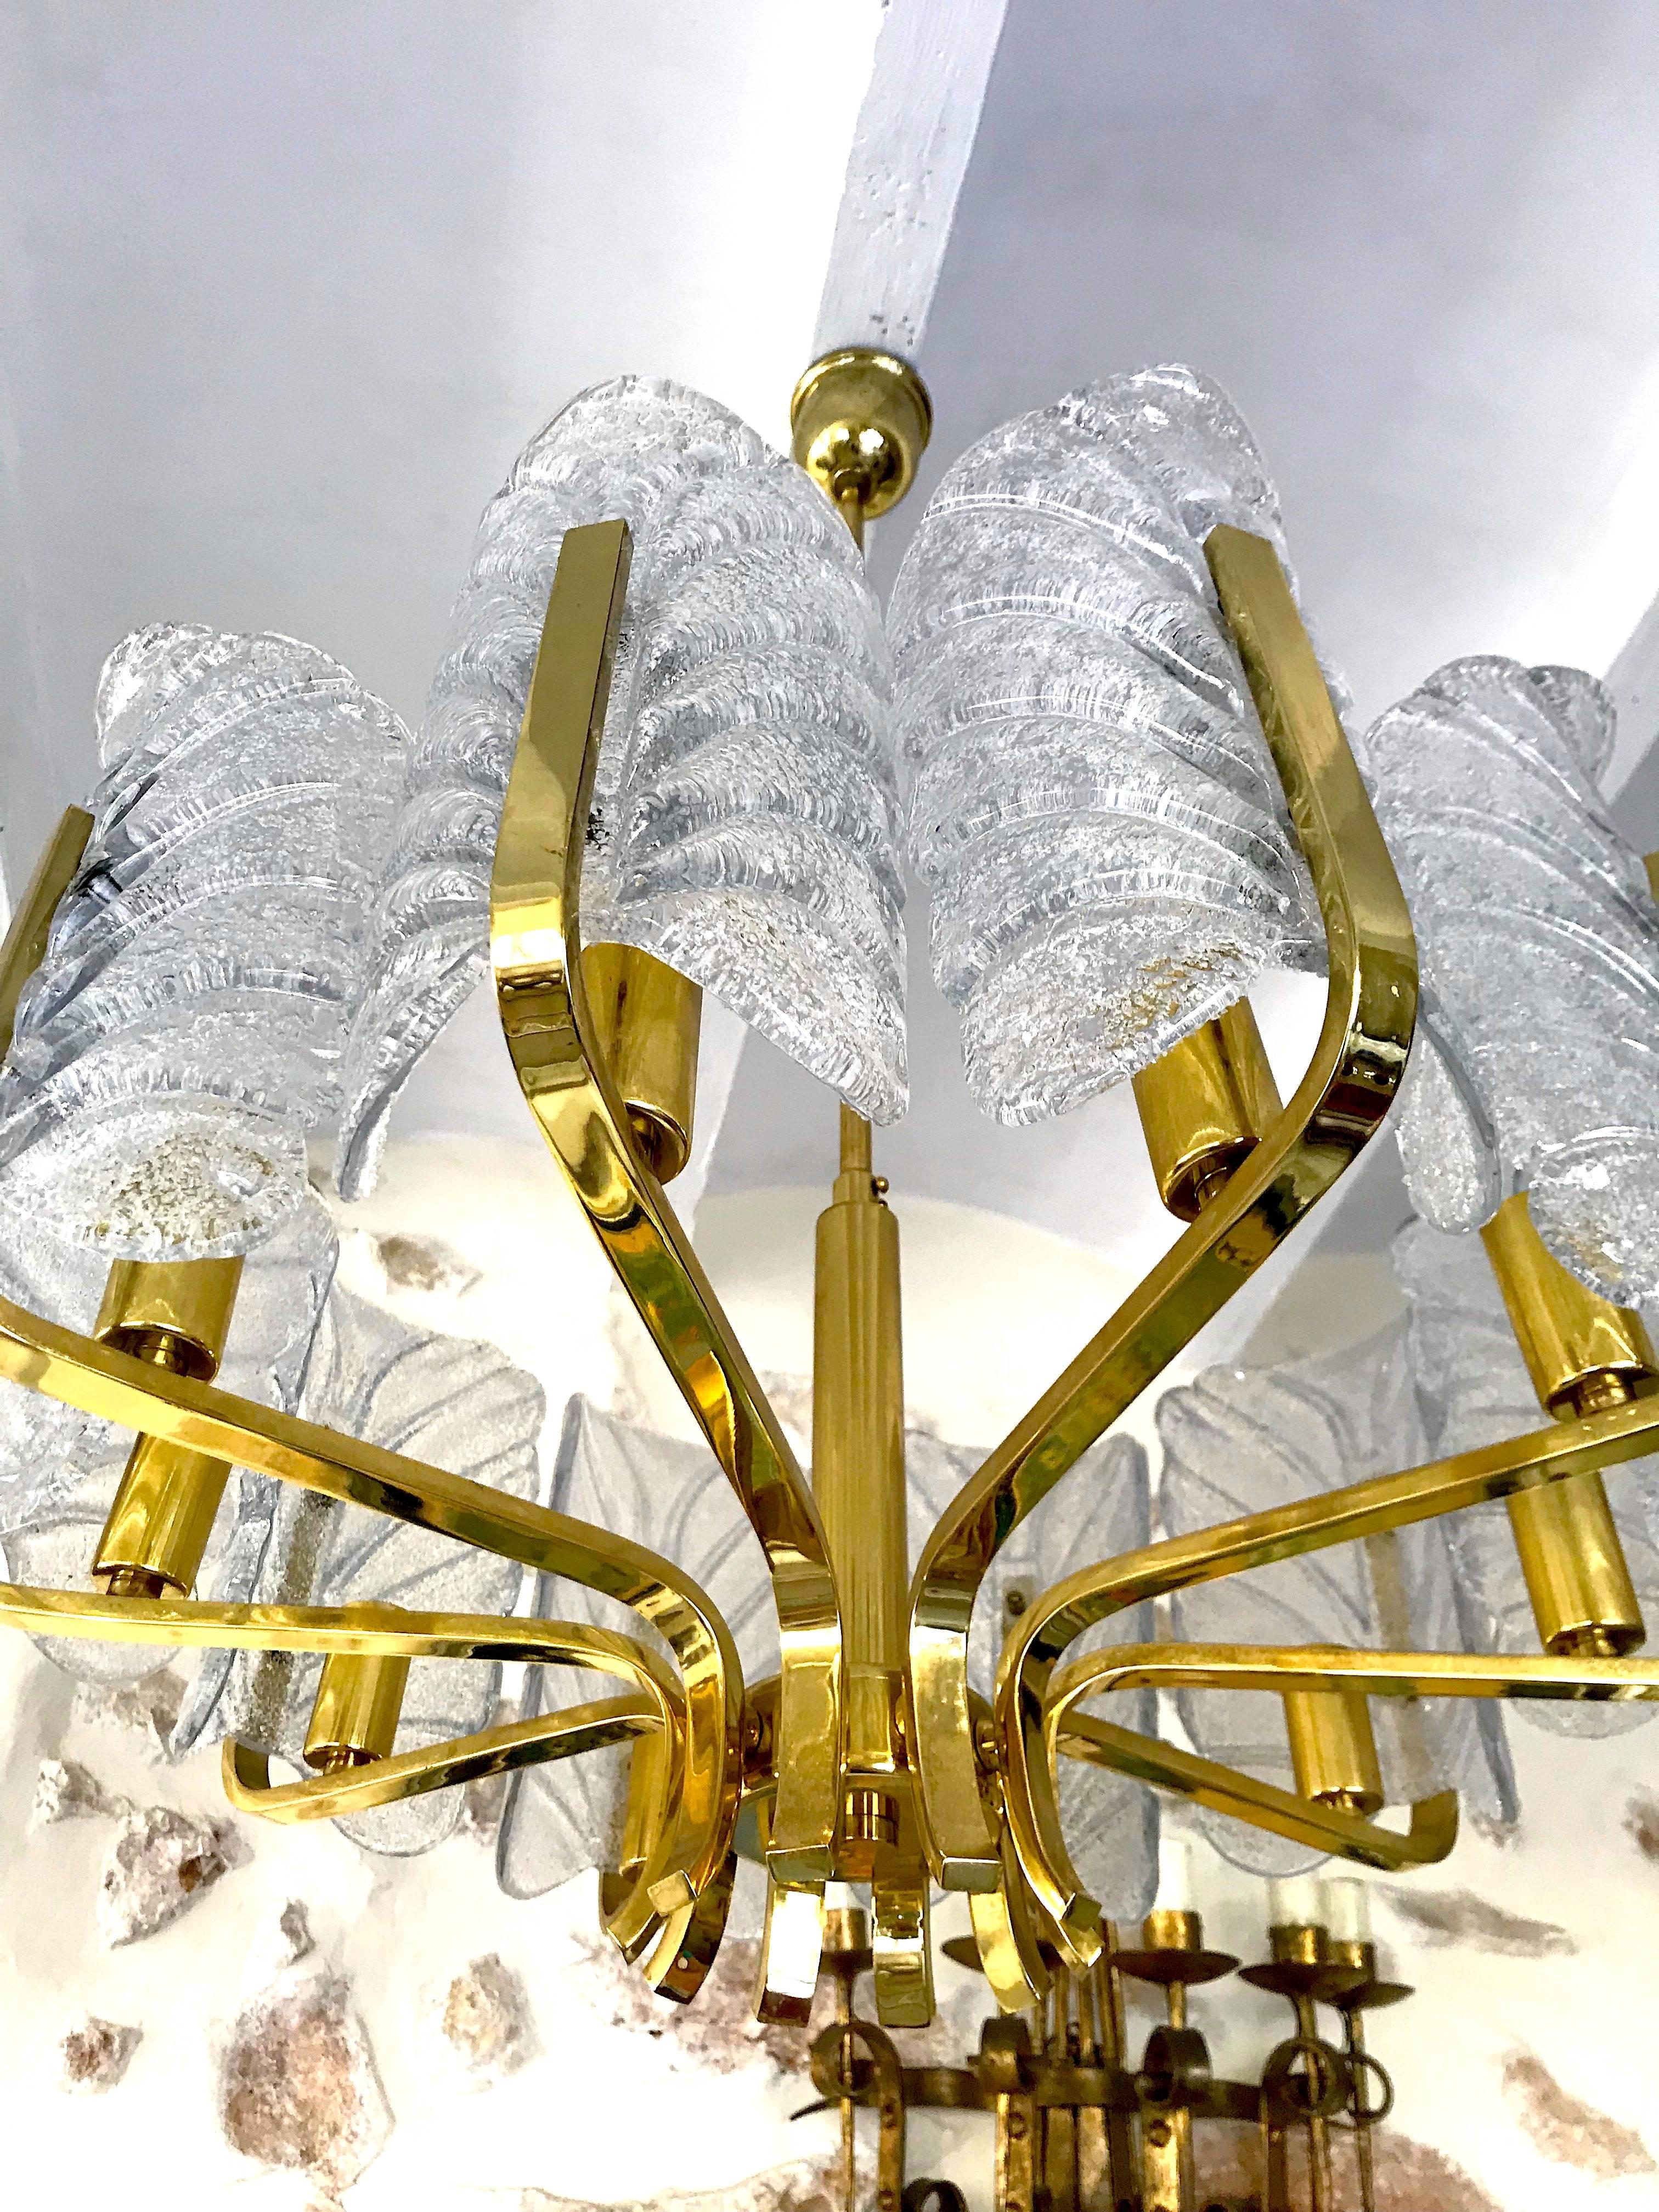 This beautifully and stunning large pendant chandelier with ten glass shades and brass fittings was produced in the 1960s by the iconic firm of Orrefors and designed by Carl Fagerlund. Beautifully carved clear frosted glass shades in a leaf design